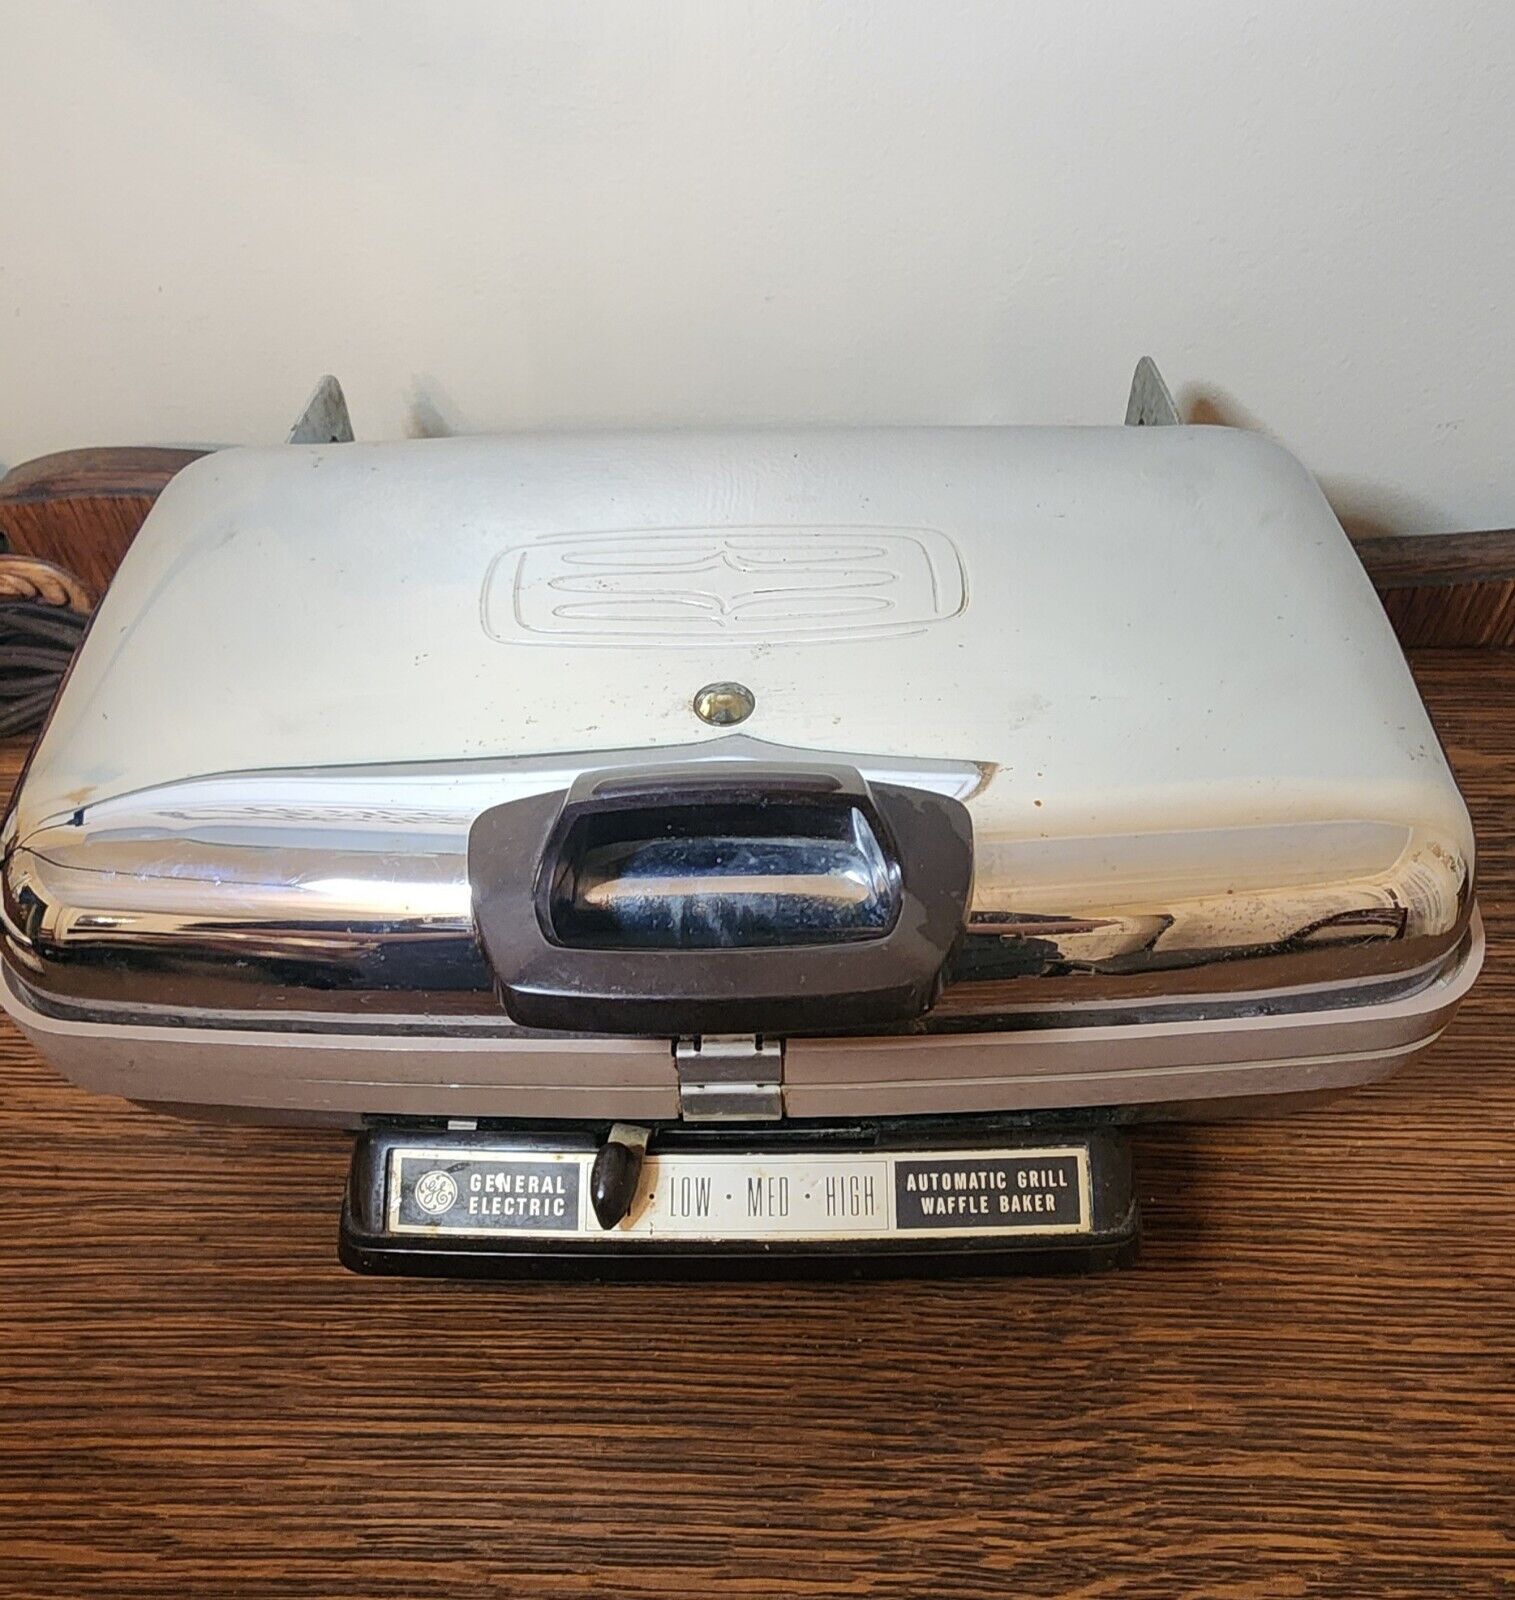 VTG 1960s GE General Electric Automatic Grill Waffle Maker 4G44T Chrome TESTED